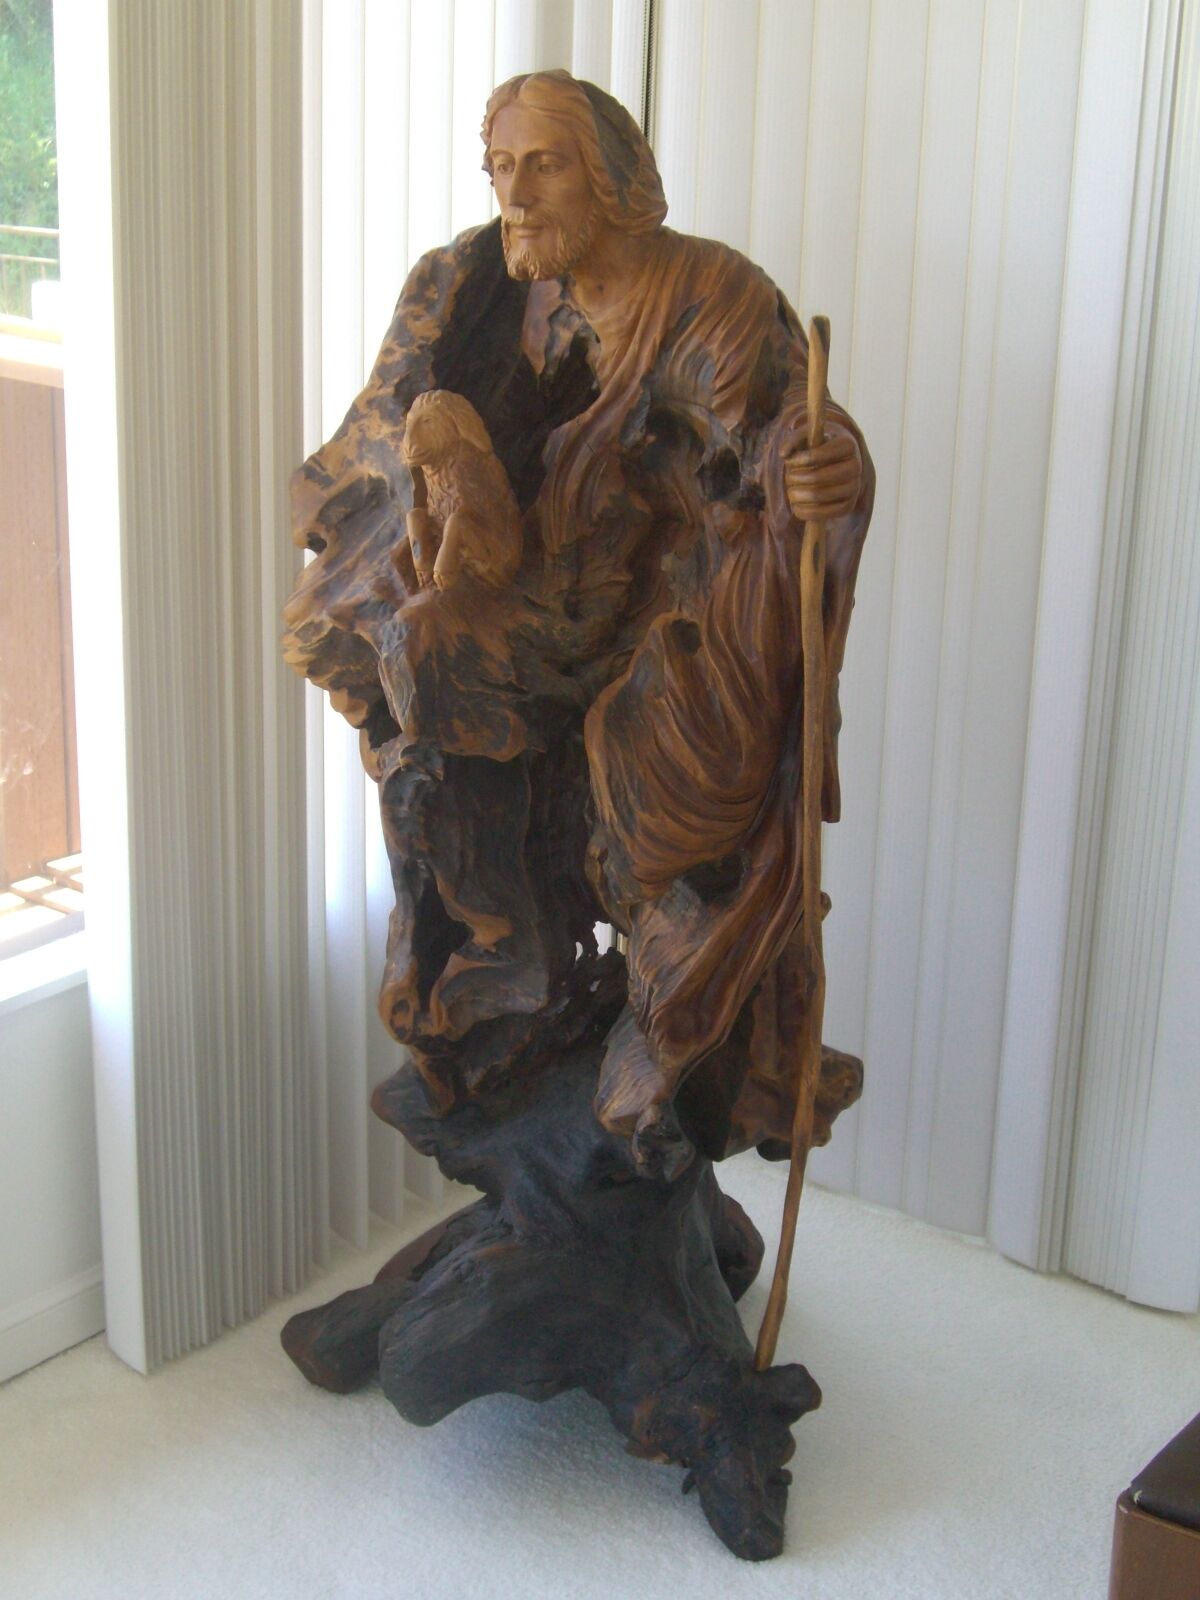 Large, beautiful wooden sculpture of Jesus holding lost lamb 5 feet 